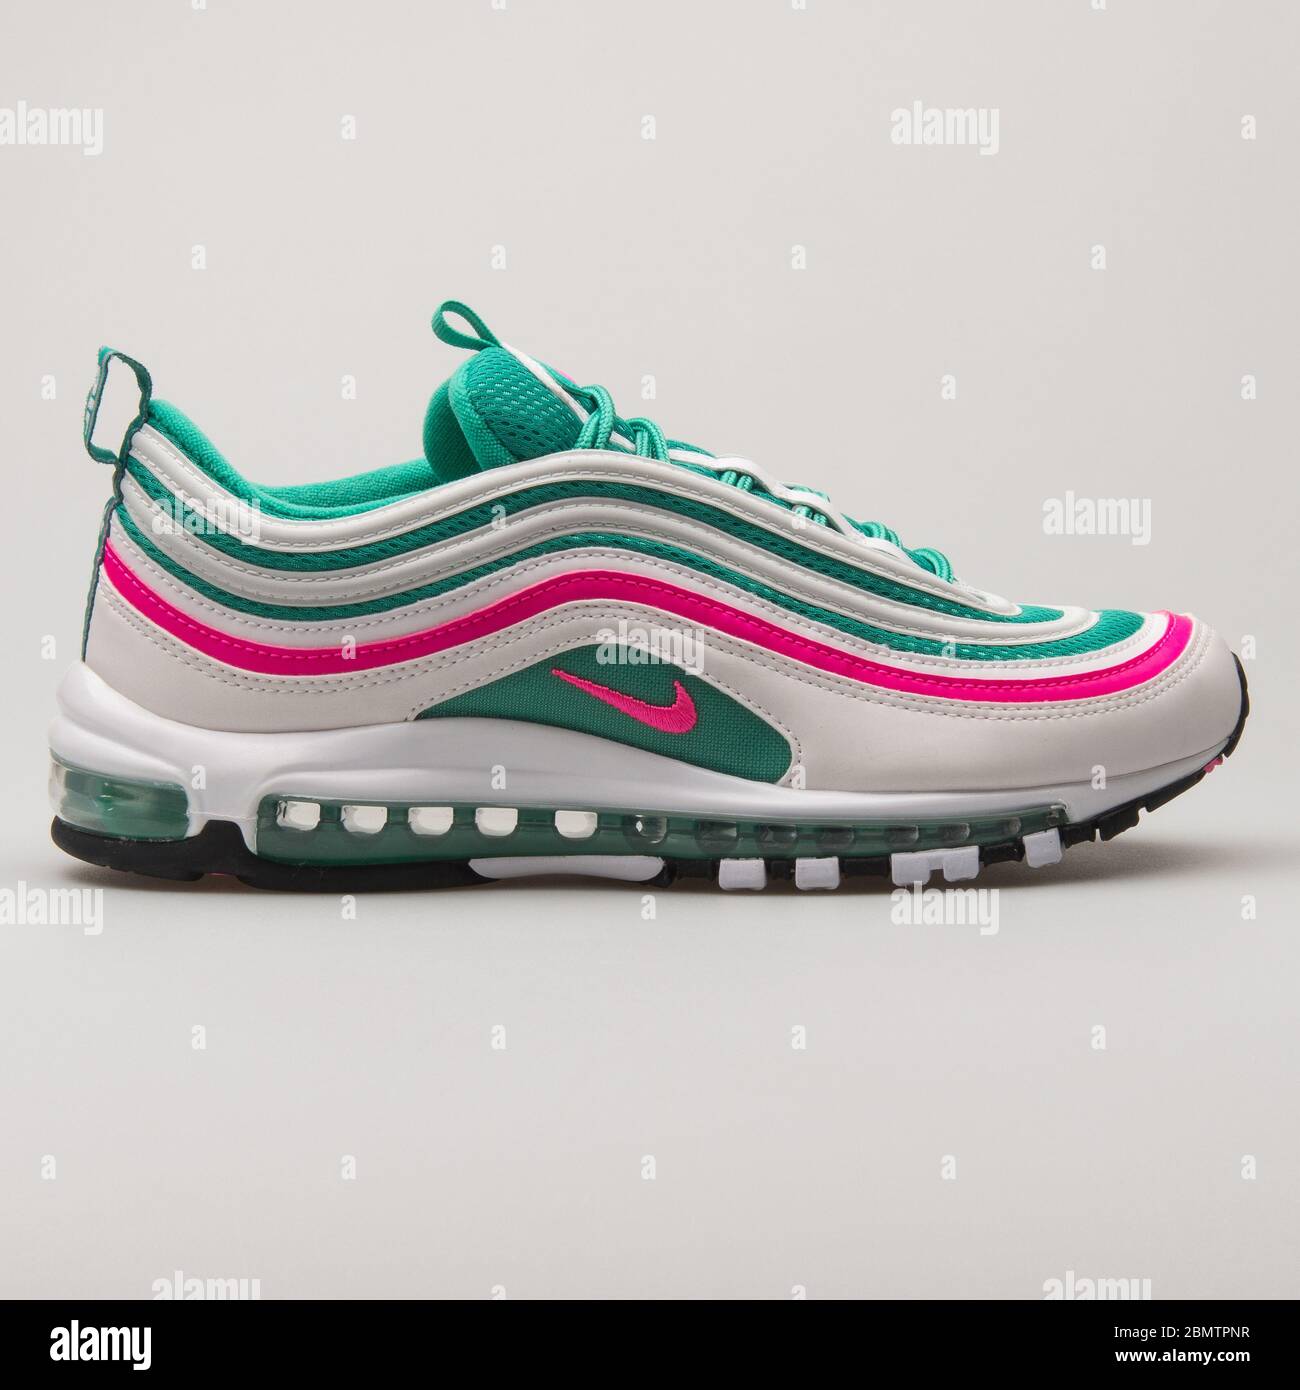 VIENNA, AUSTRIA - FEBRUARY 19, 2018: Nike Air Max 97 white, green and pink  sneaker on white background Stock Photo - Alamy